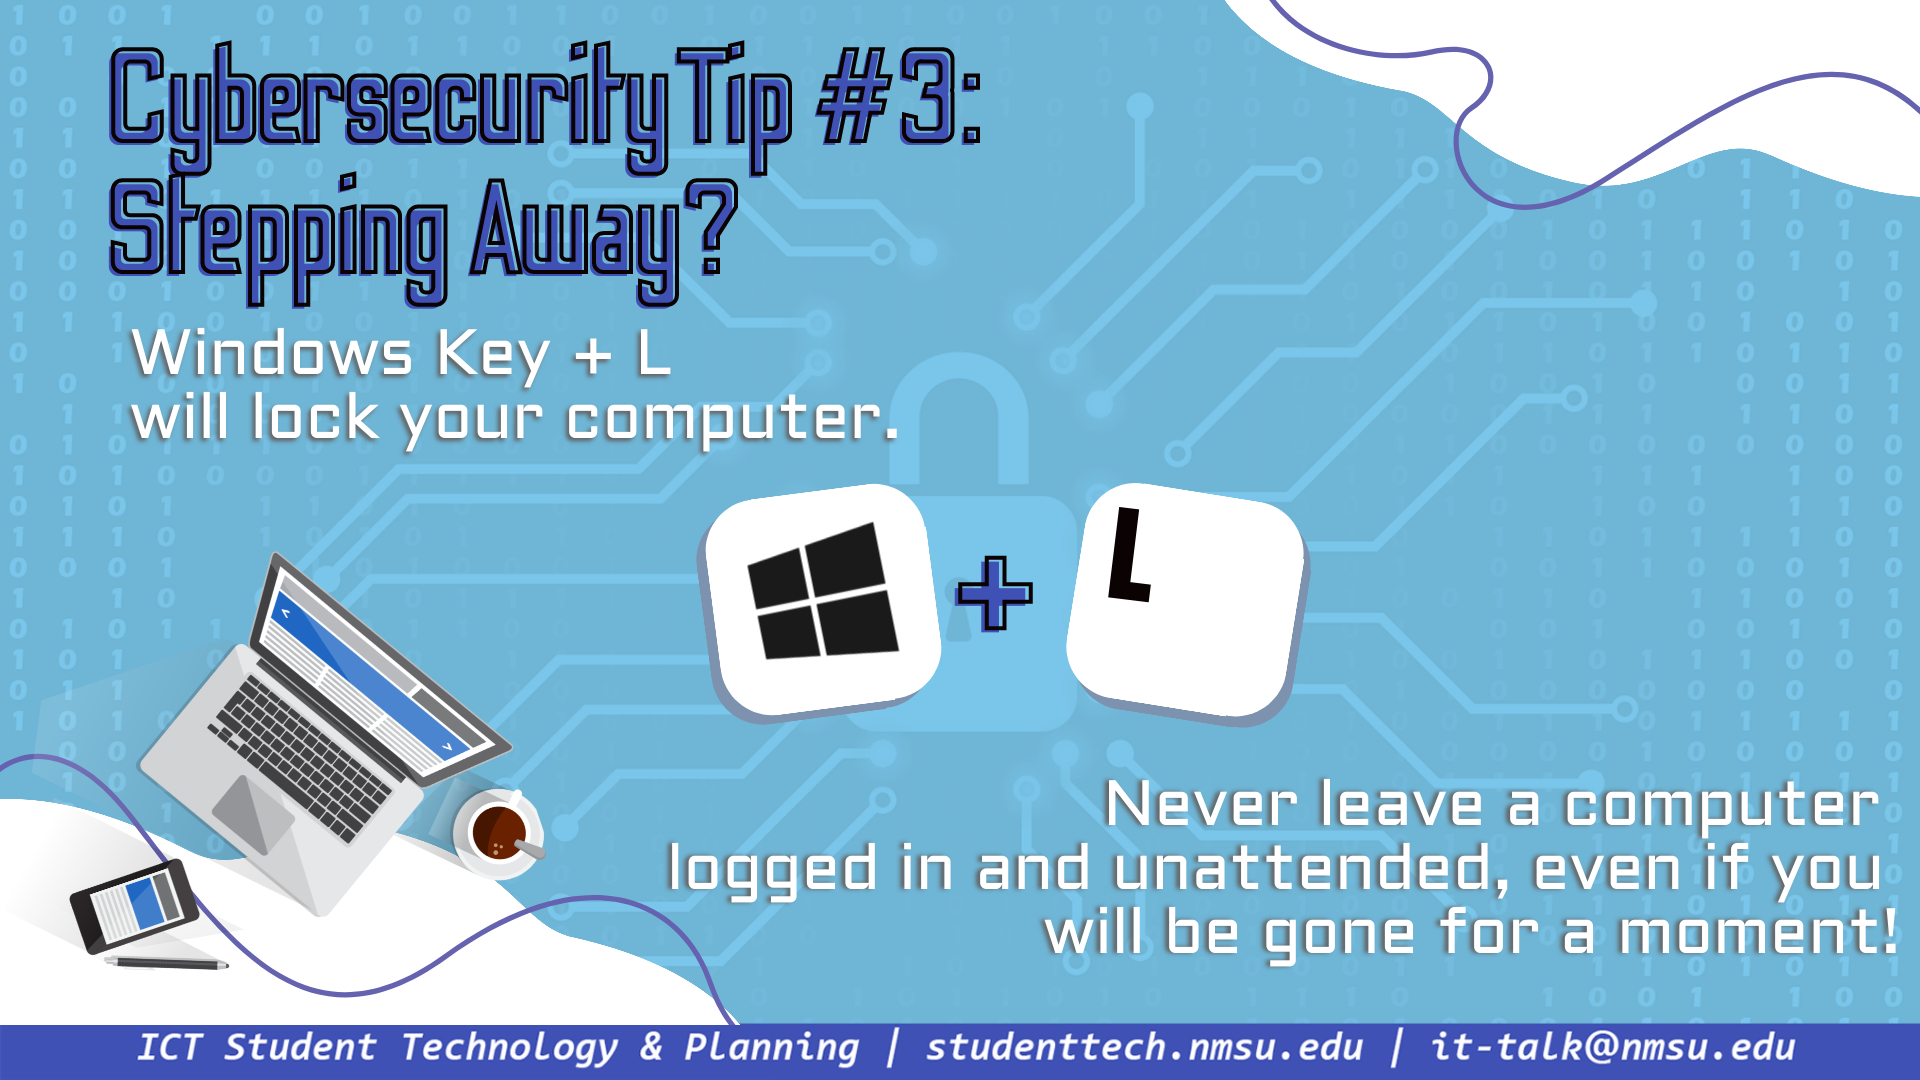 Tip #3: Windows Key + L will lock your computer. Never leave a computer logged in and unattended, even if you will be gone only a moment!